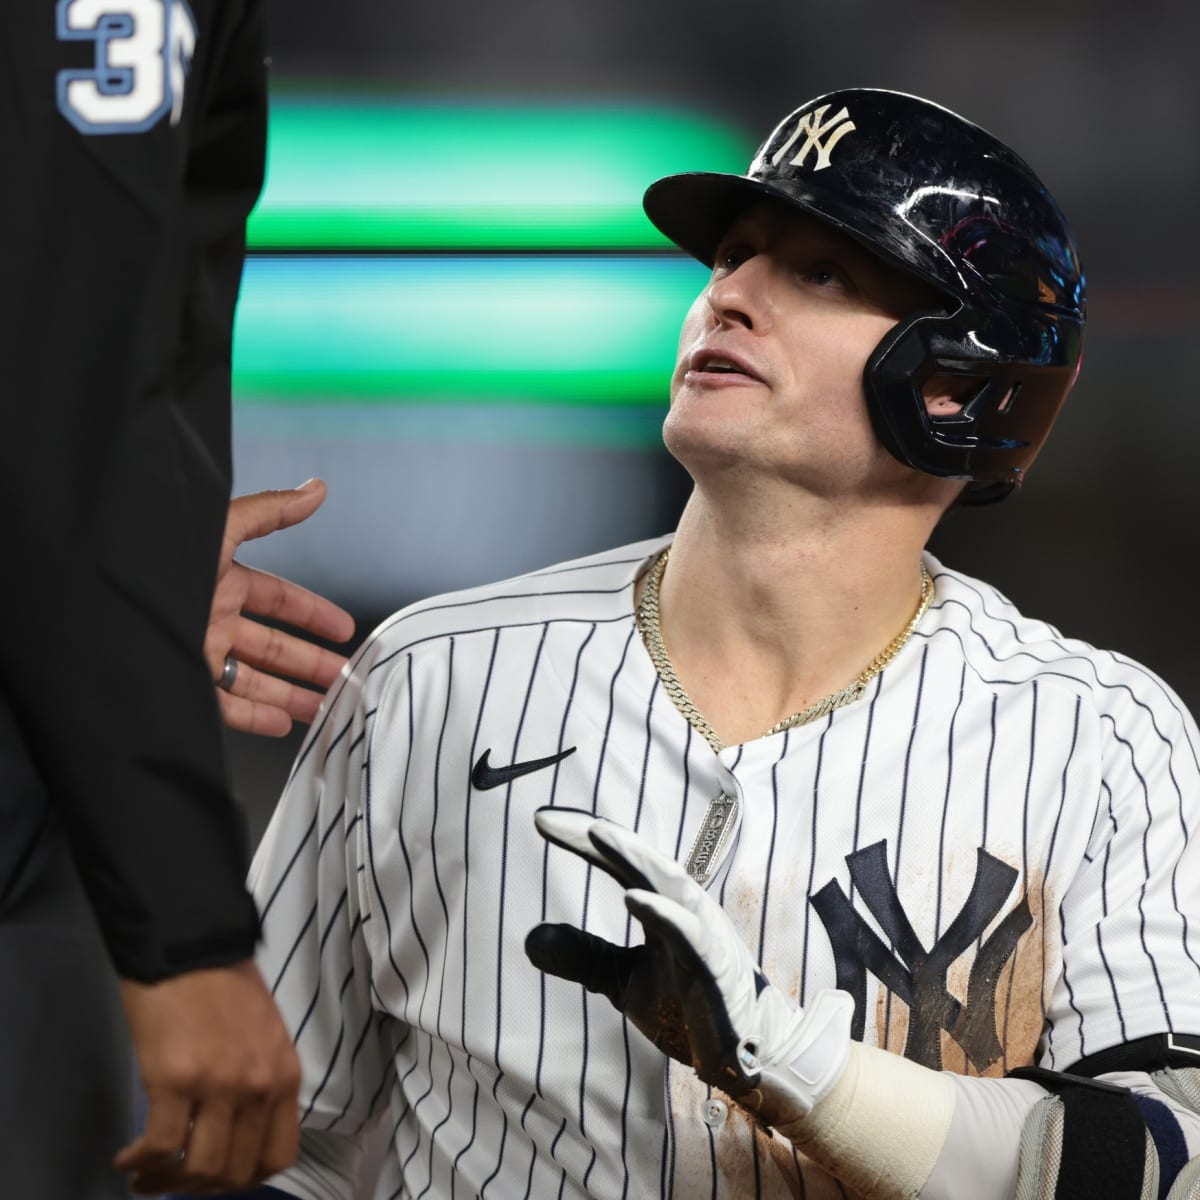 Oh, baby! Josh Donaldson comes up big for Yankees in return